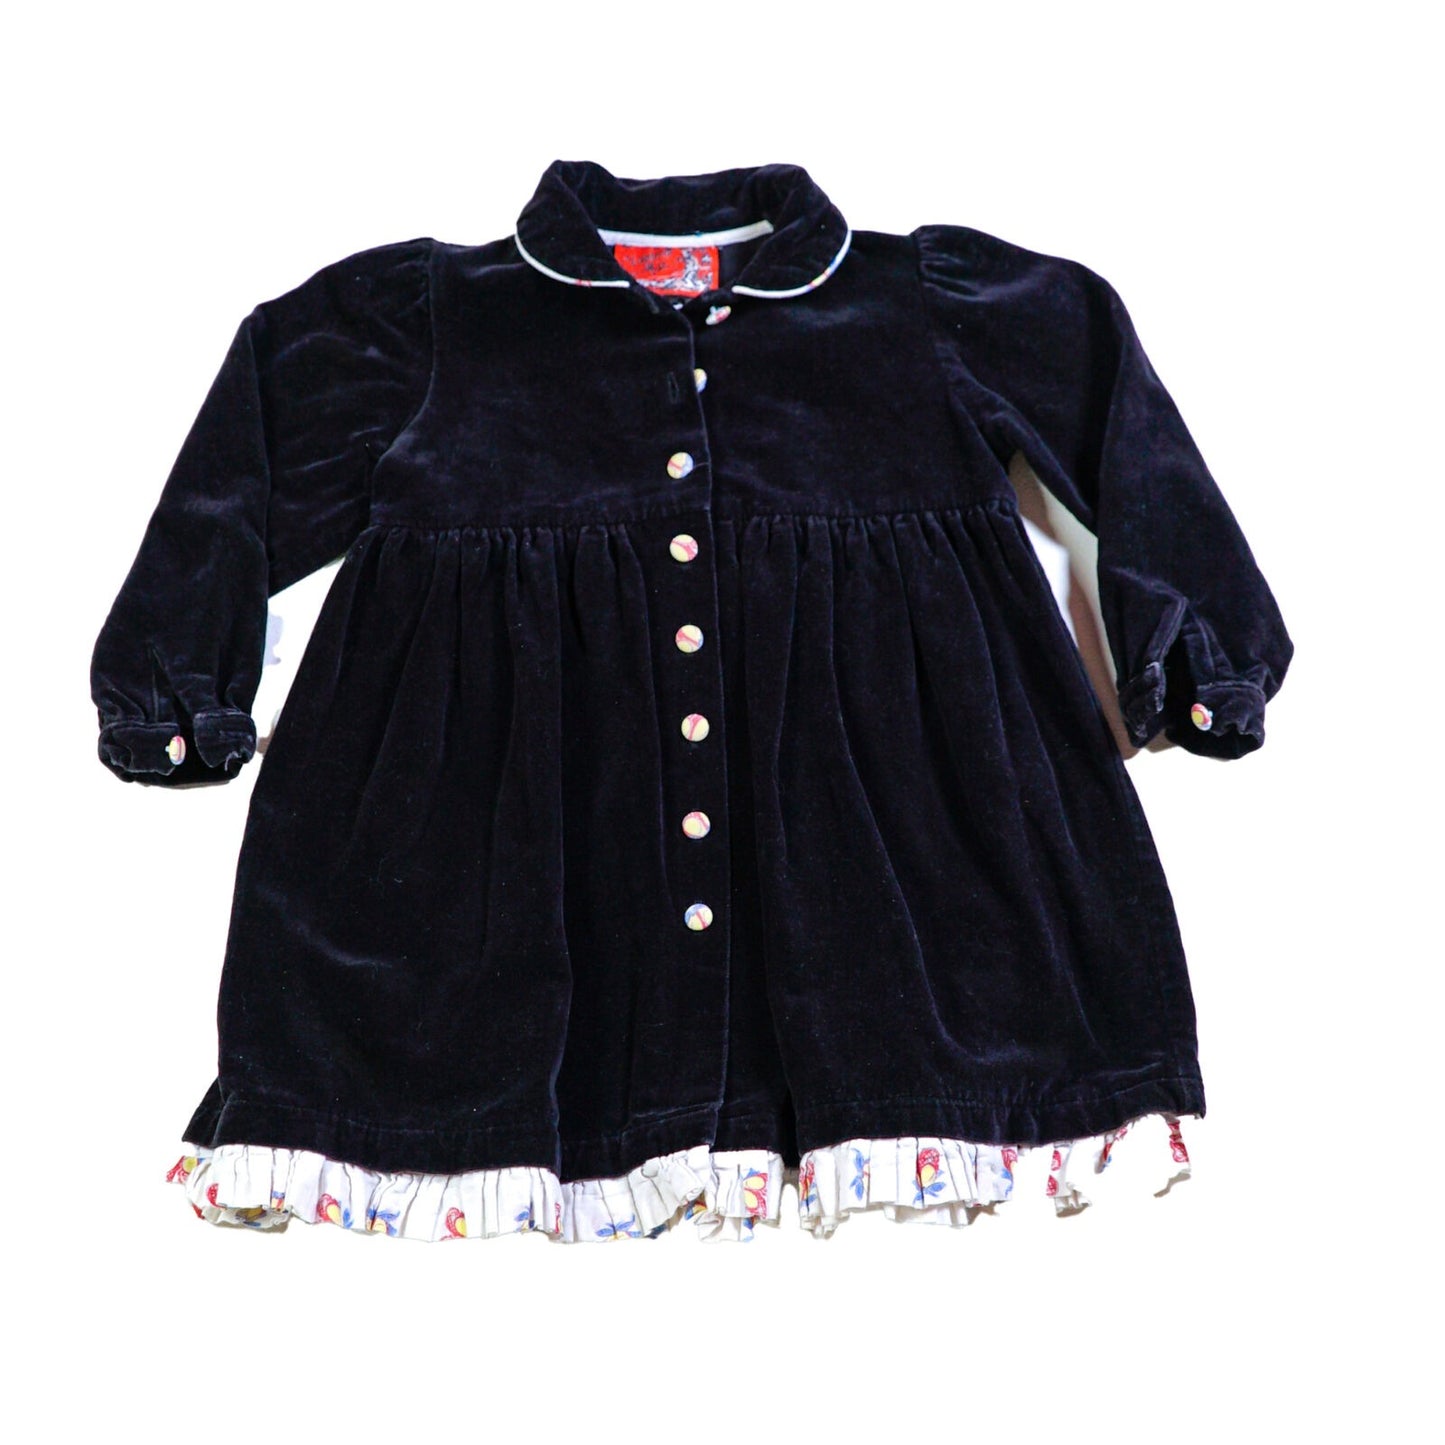 Velvet printed frill smock dress with button front collar